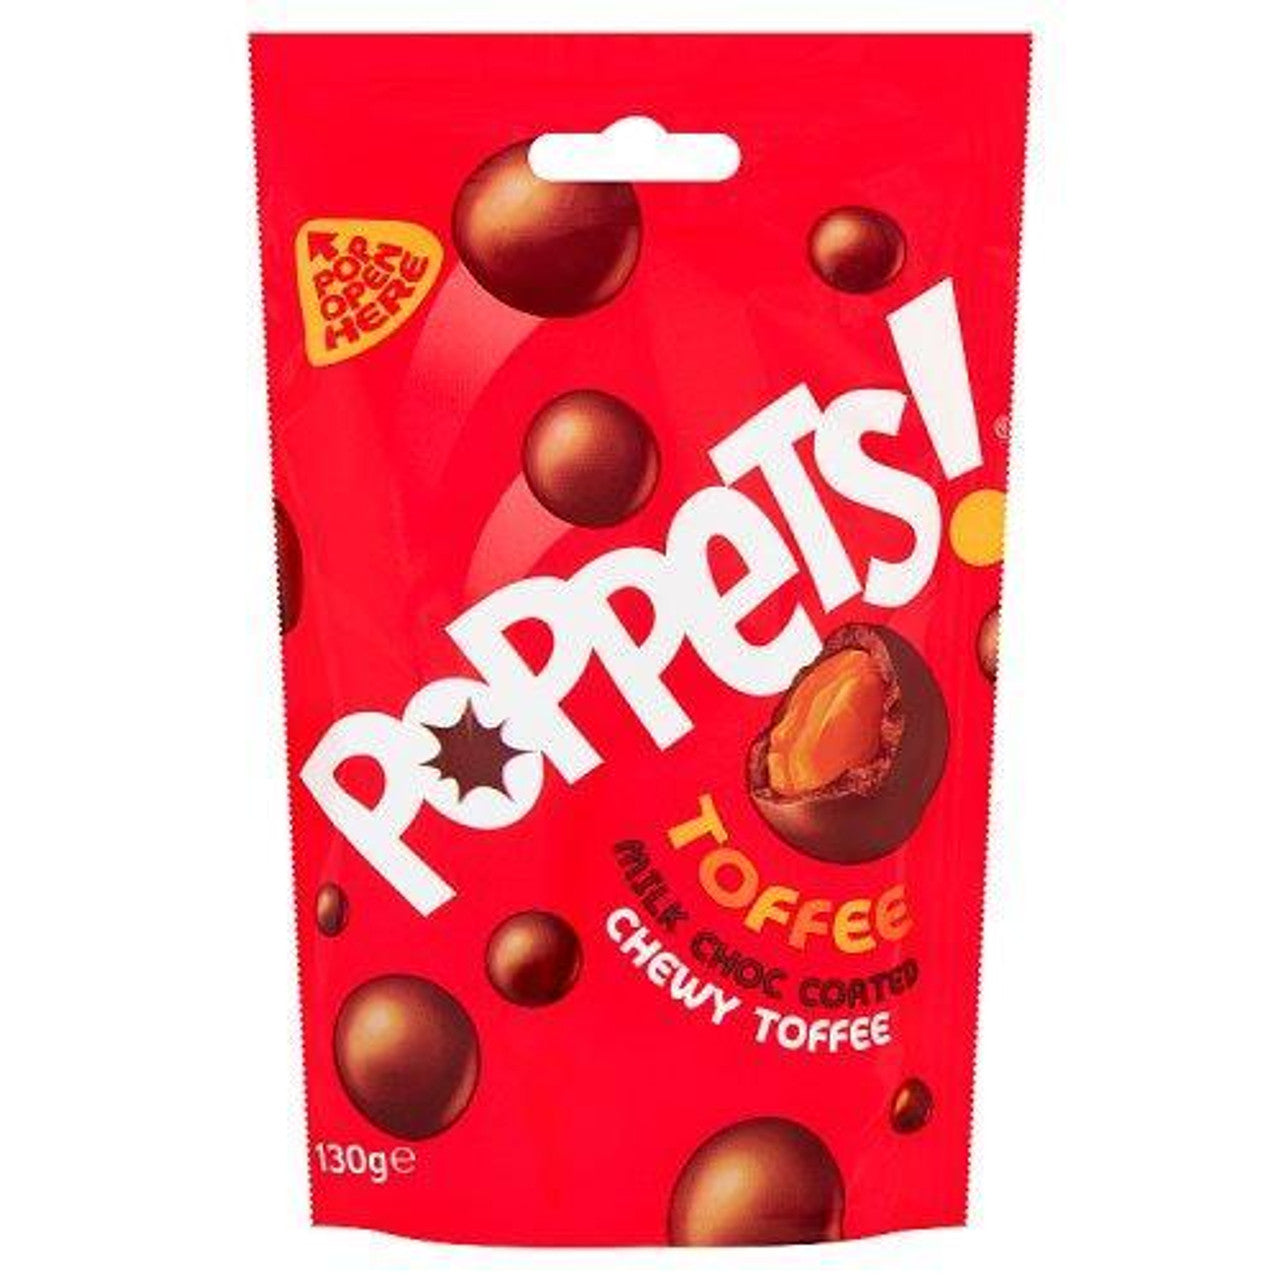 Paynes Poppets Chocolate Toffee Pouch, 4.58 oz